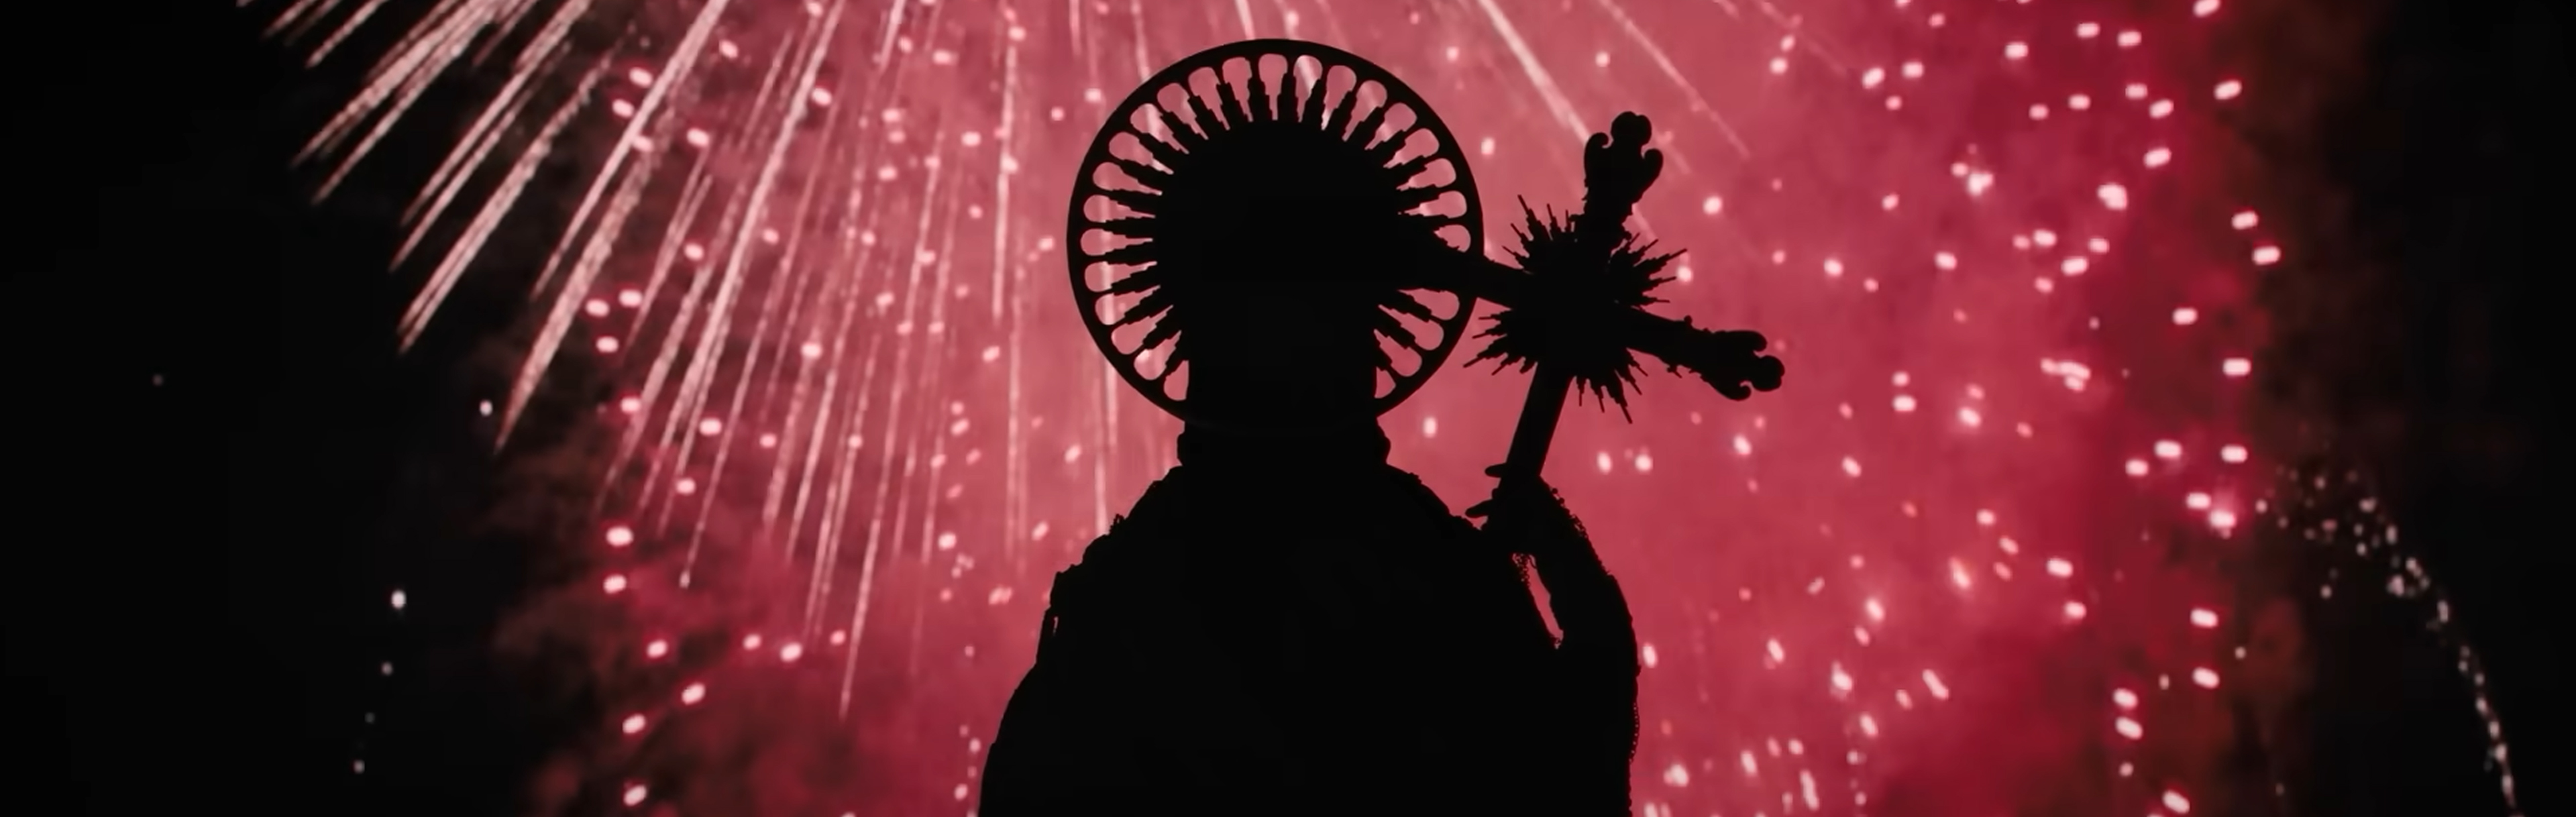 fireworks explode behind a religious statue.